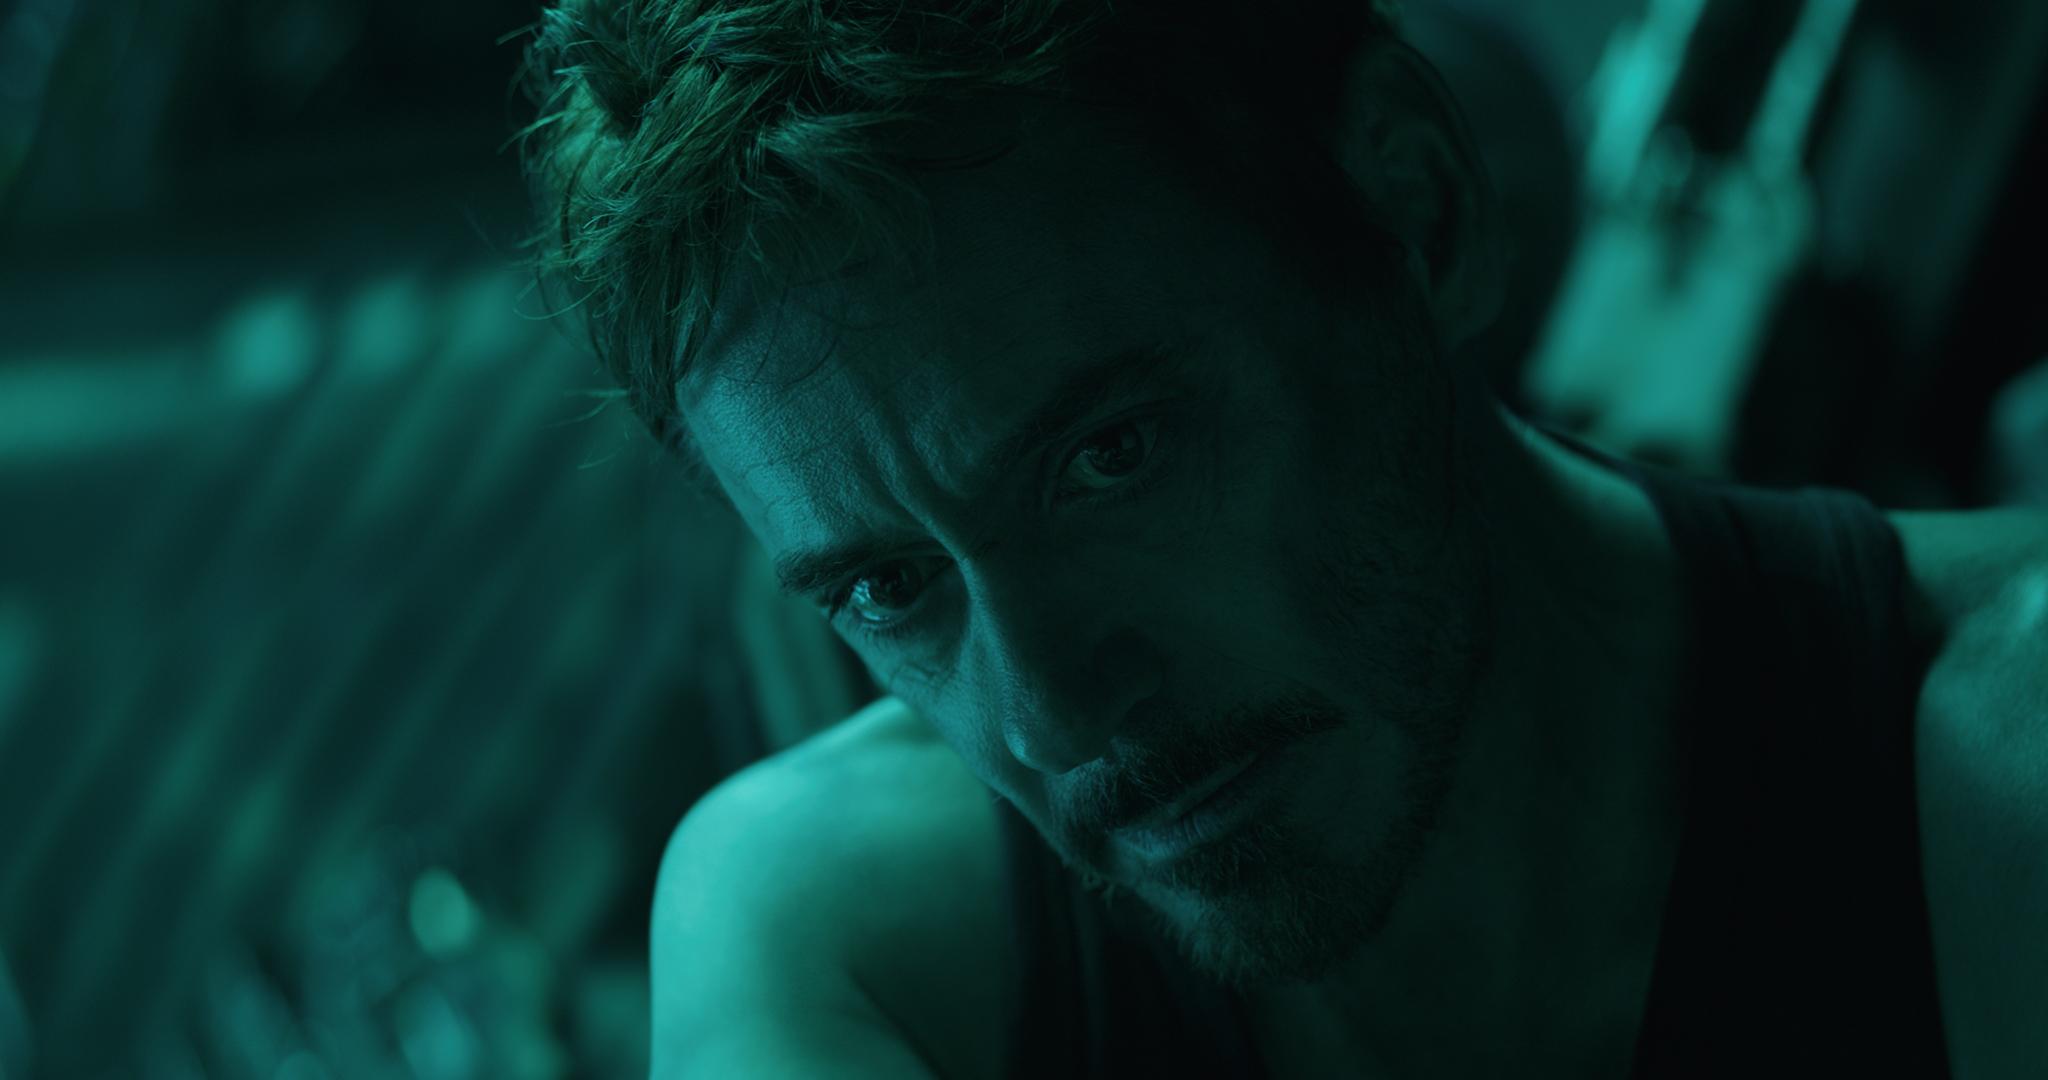 Petition to Bring Tony Stark Back .indiewire.com